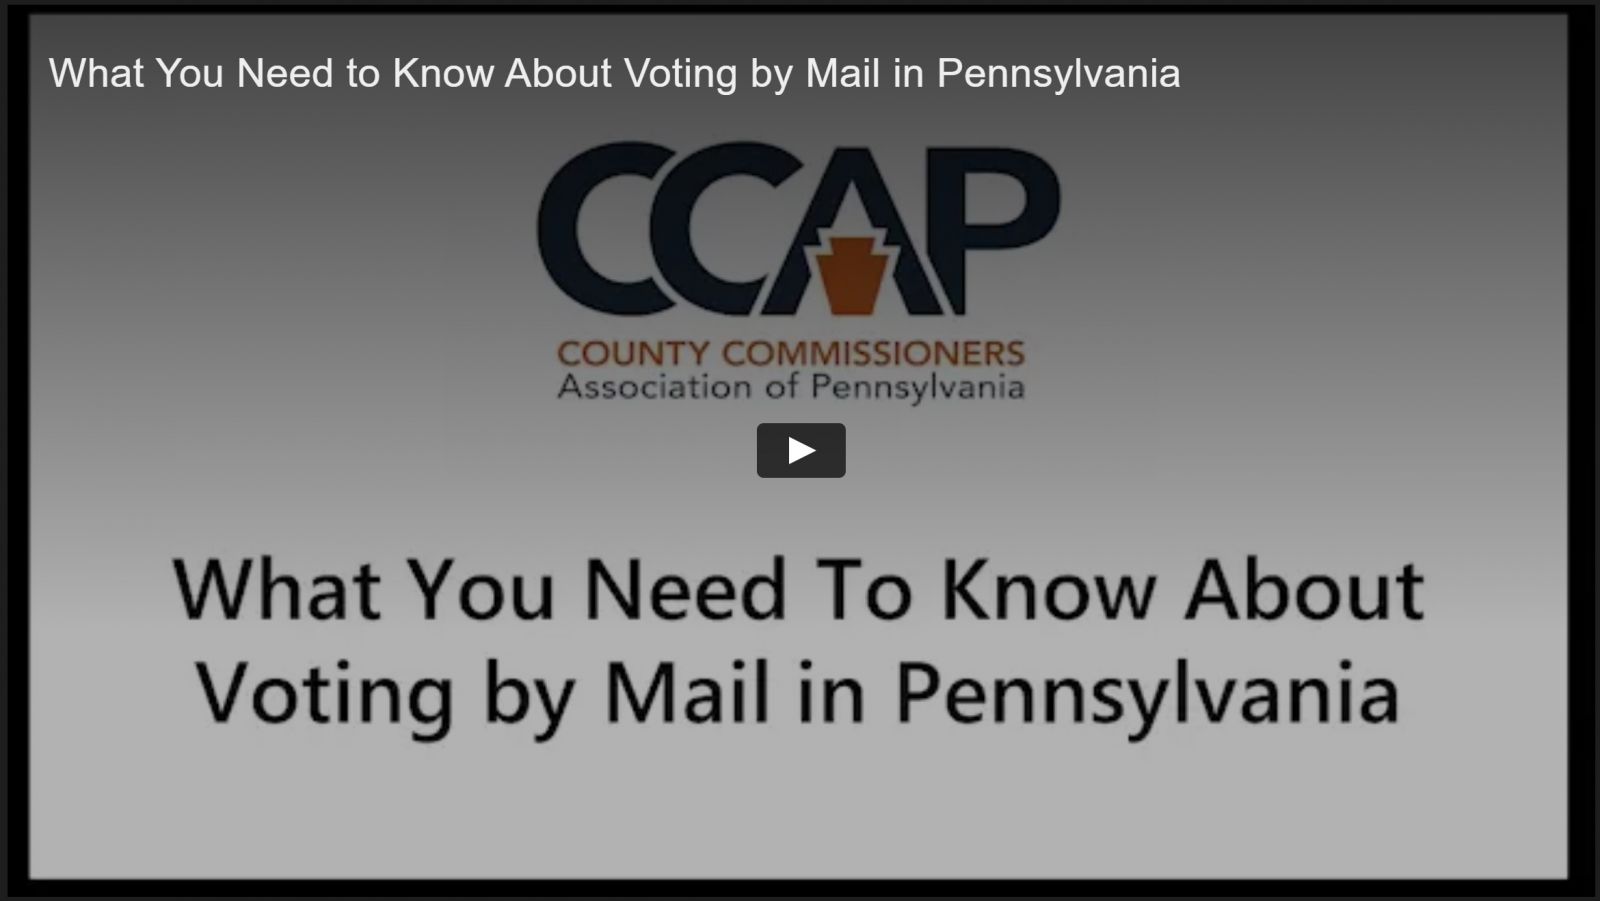 What you need to know about voting by mail in Pennsylvania CCAP County Commissioners Association of Pennsylvania